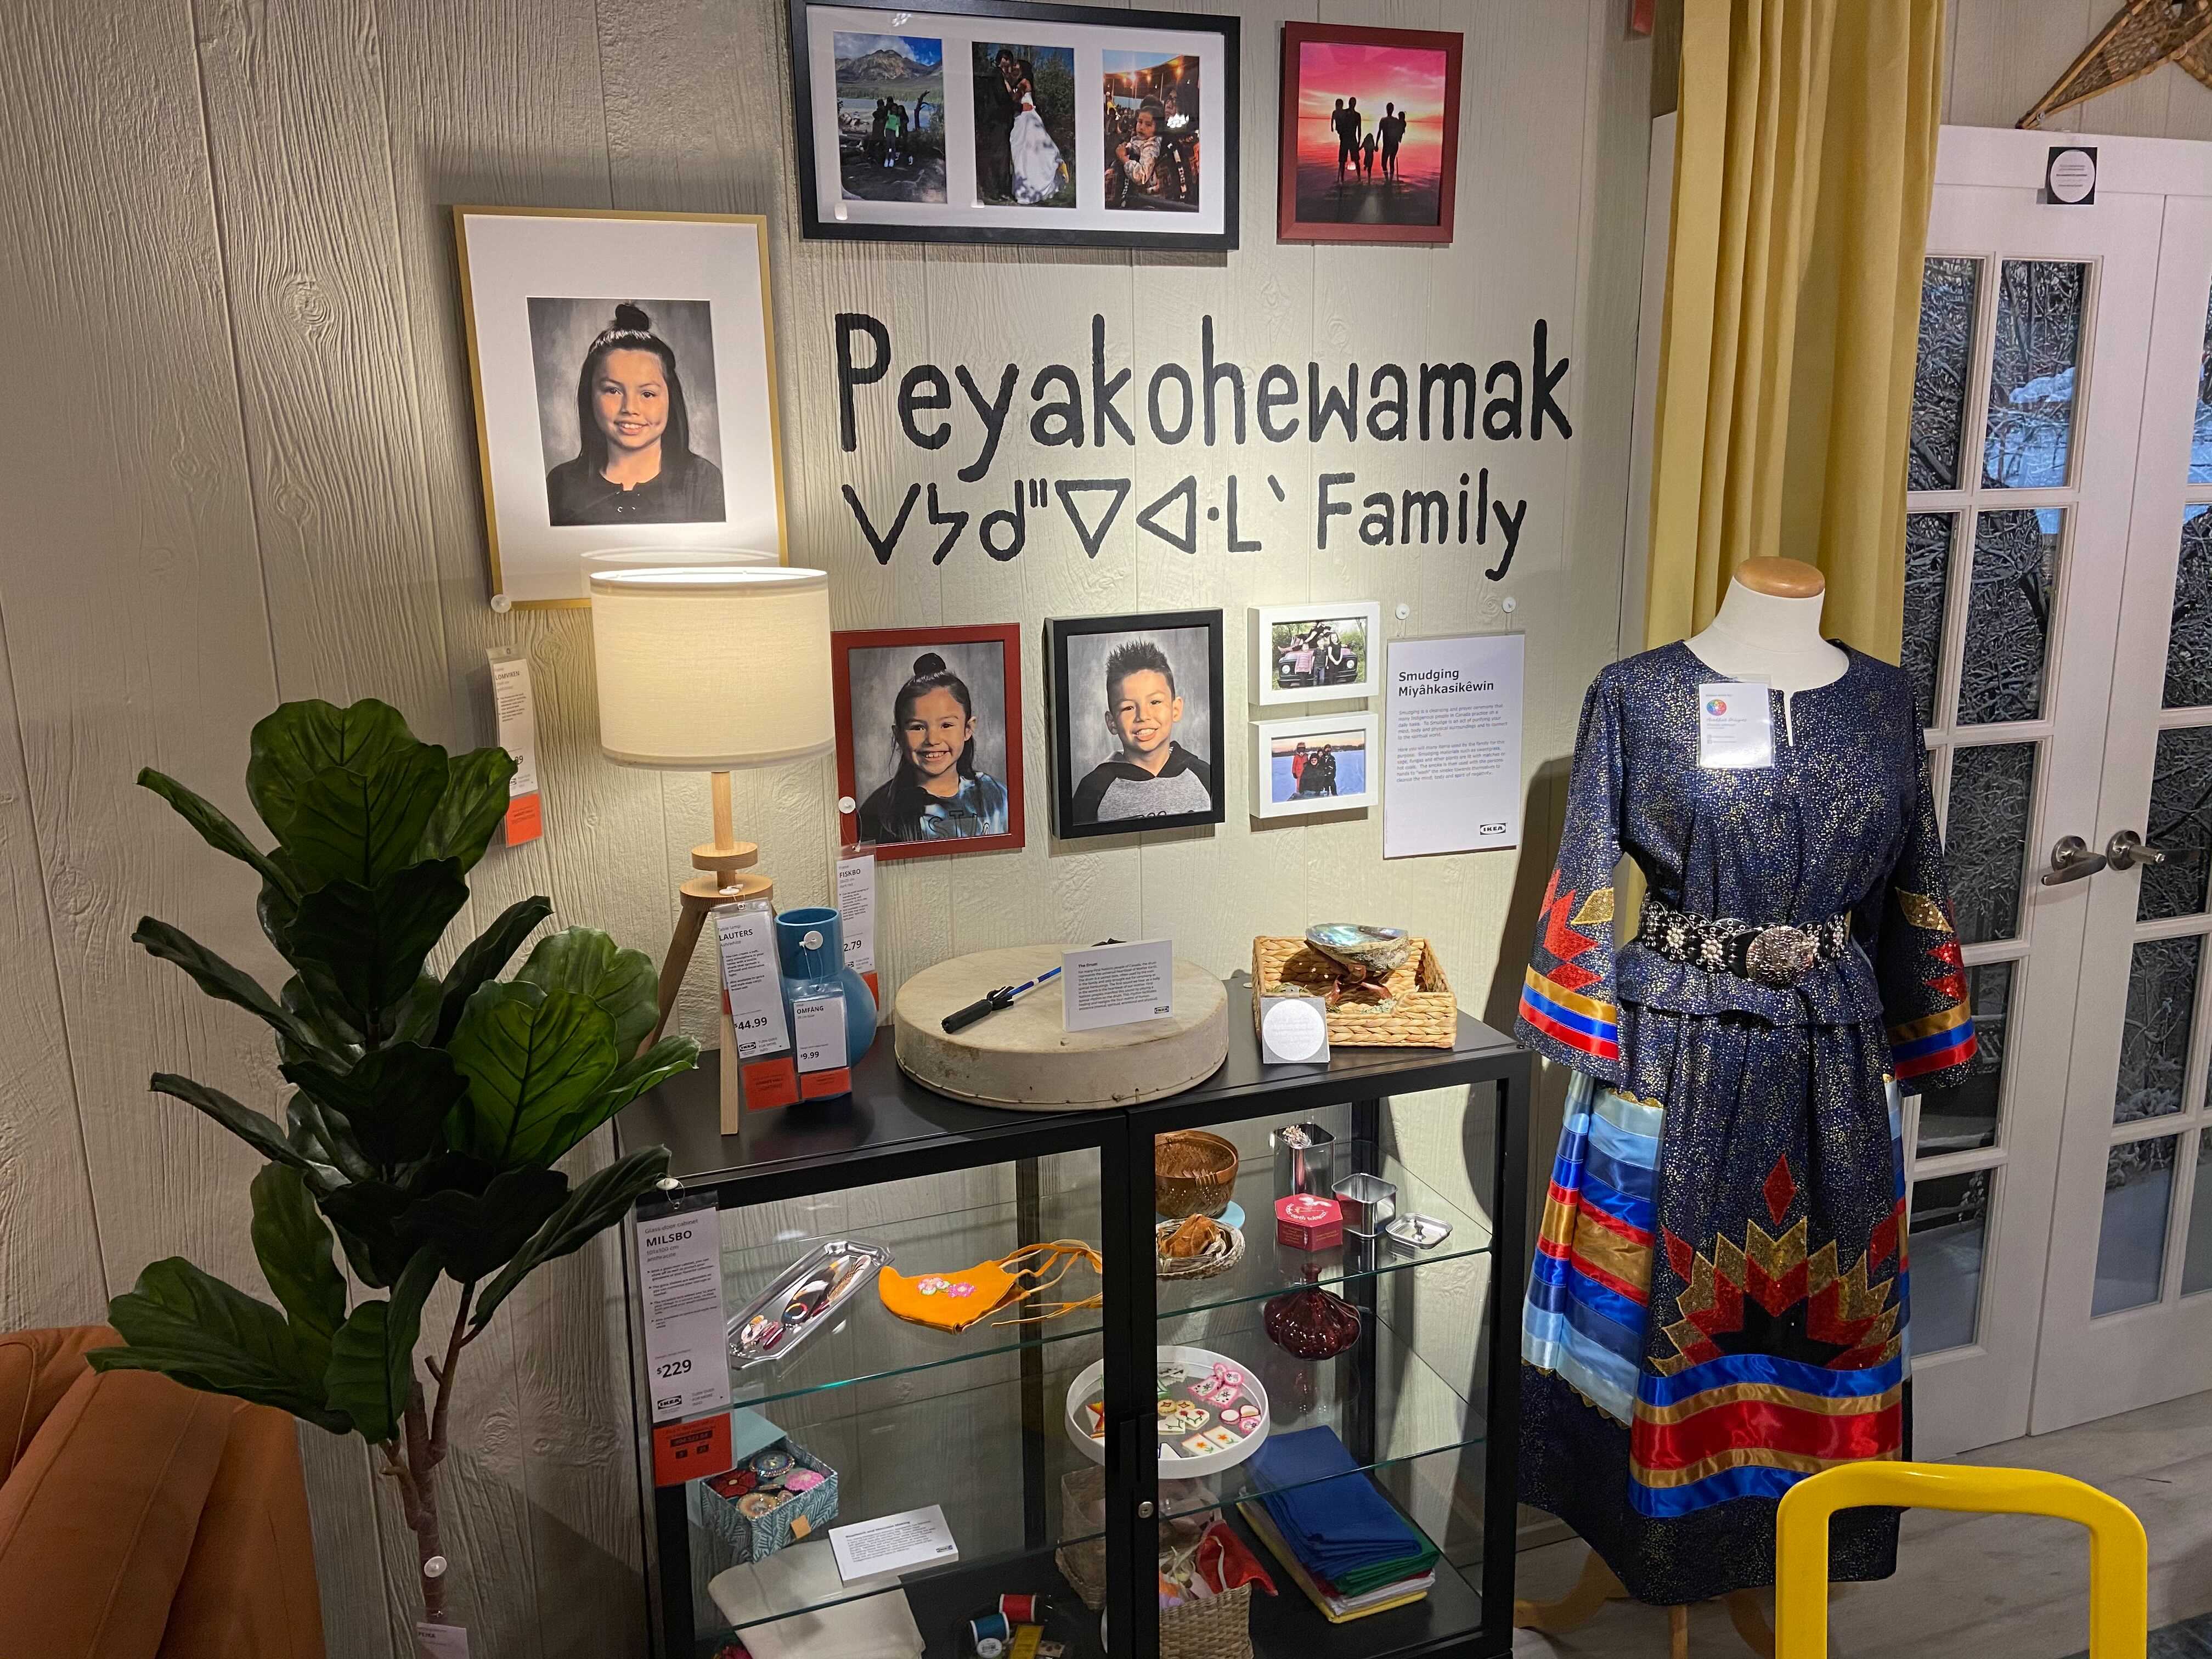 Items from an actual Alberta family were used in the creation of an Indigenous IKEA Edmonton showroom.